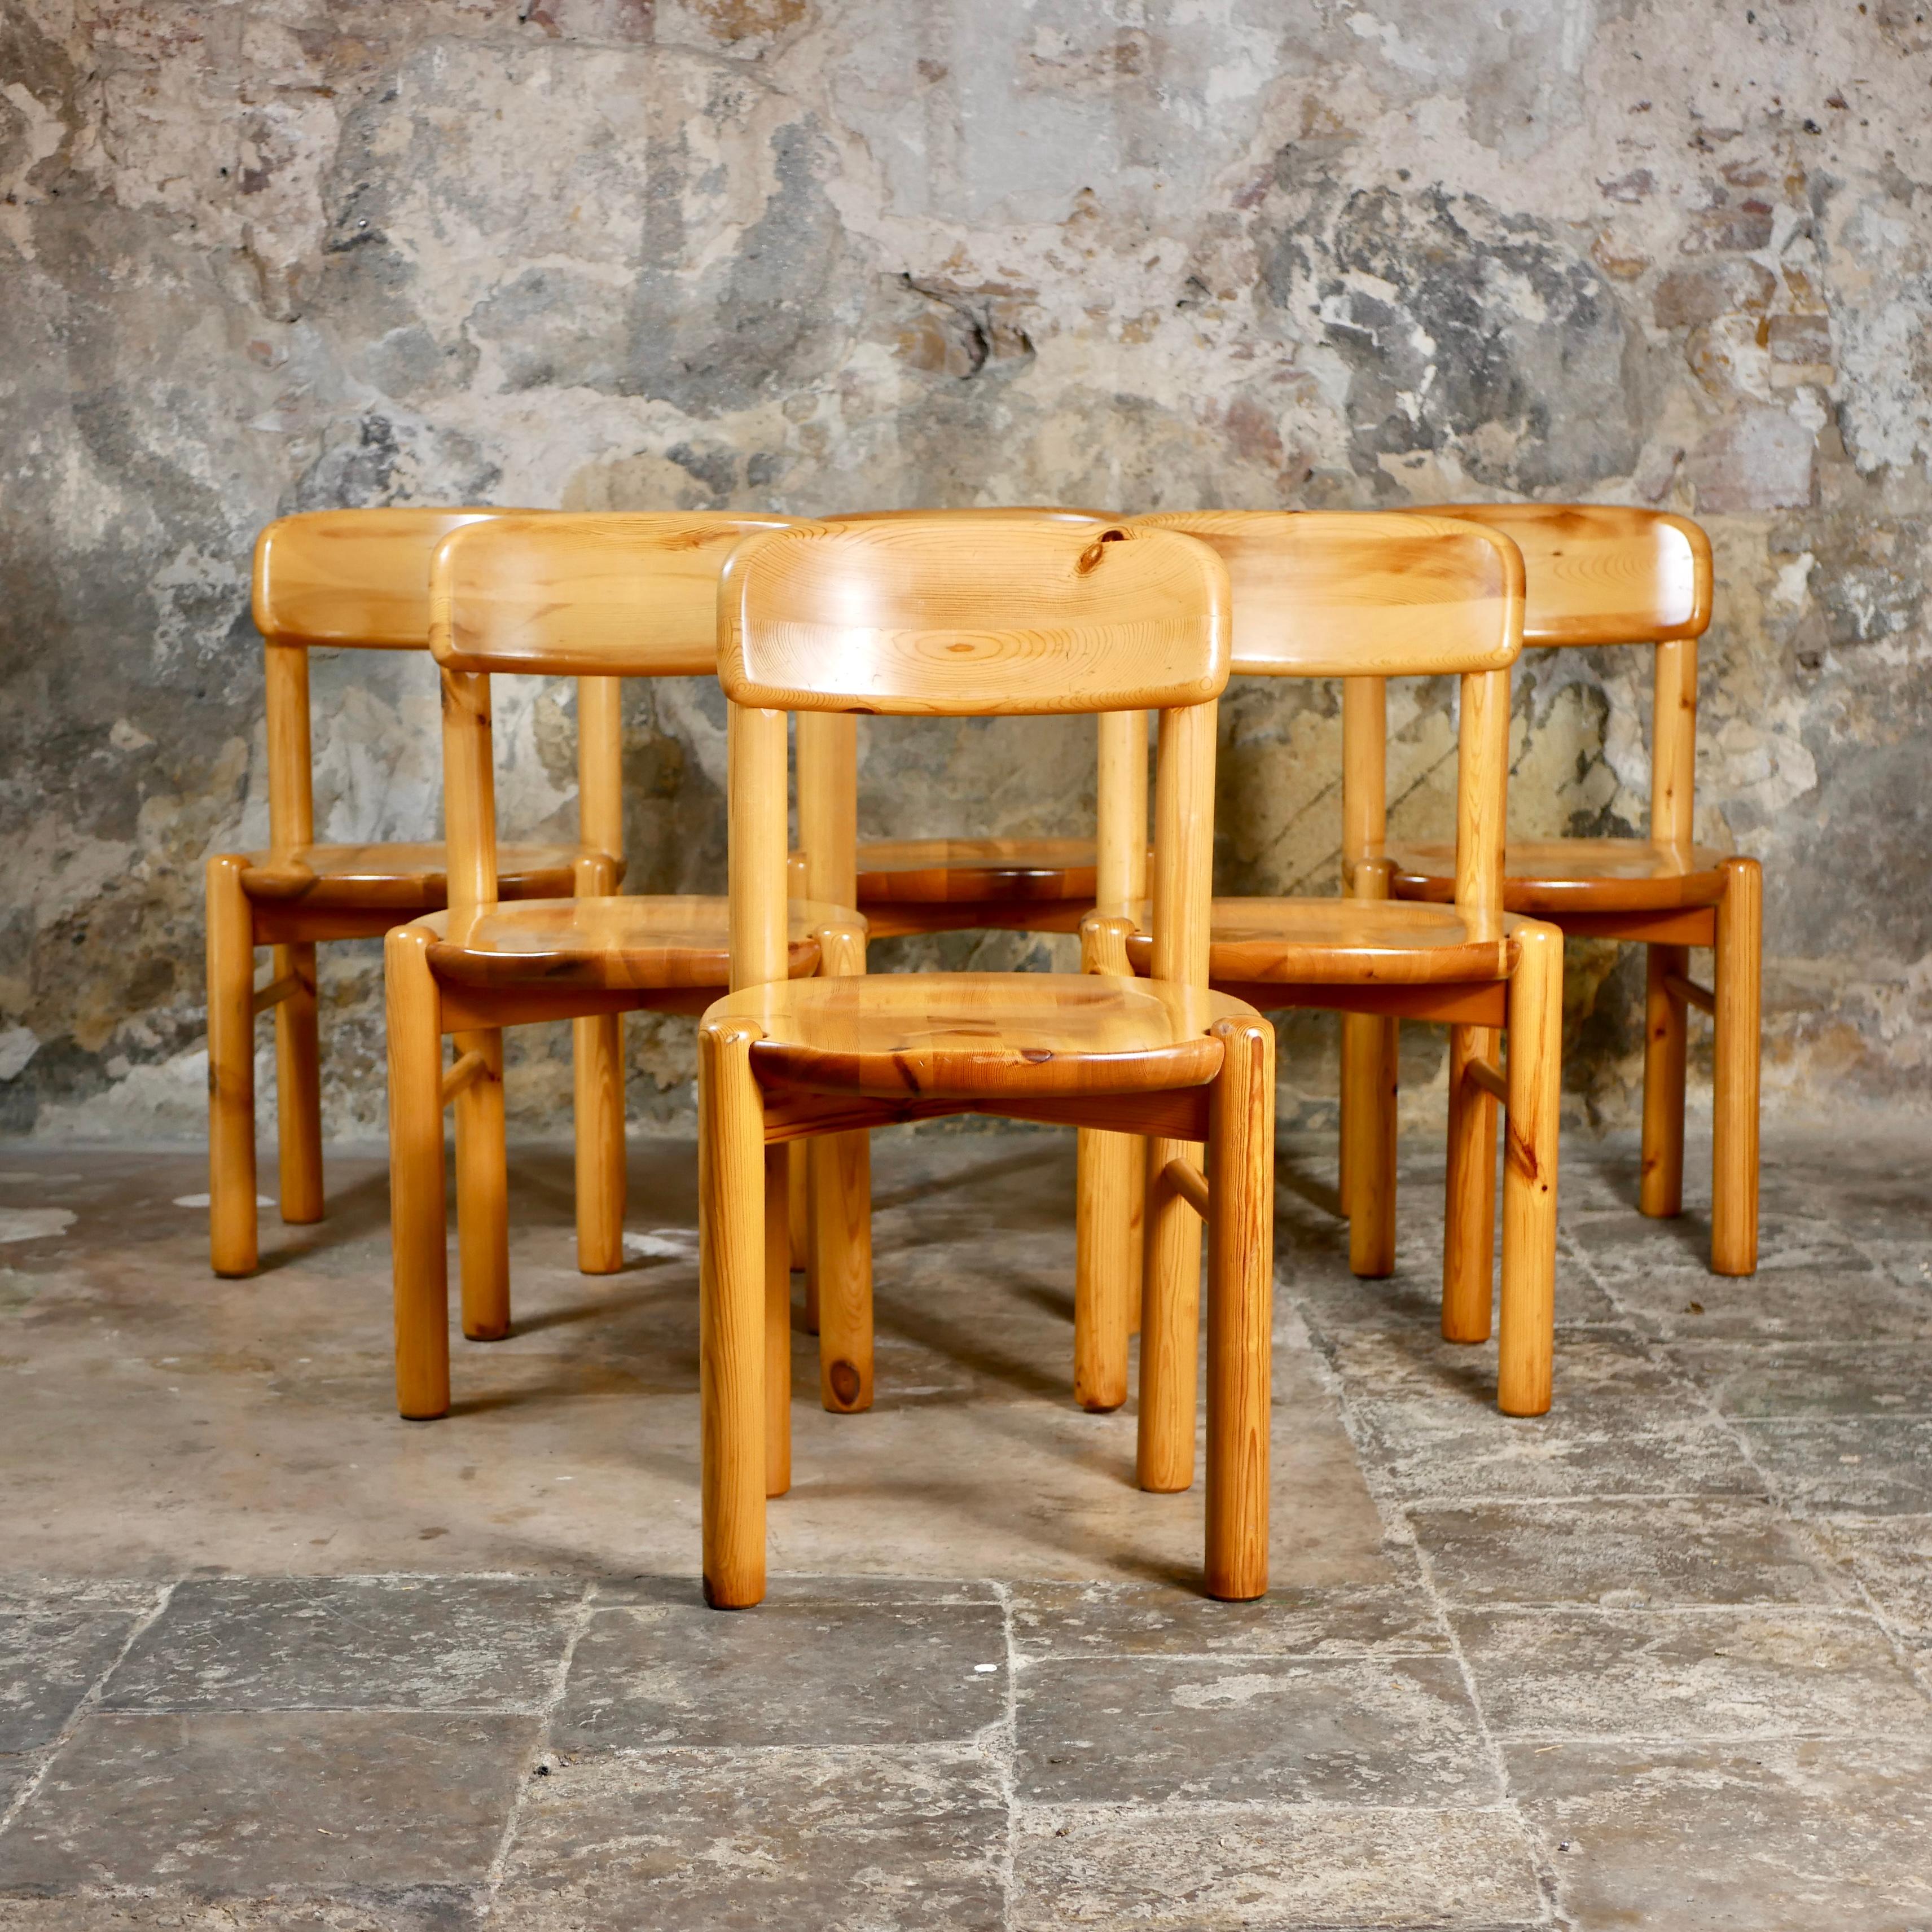 Danish Set of 6 pine chairs by Rainer Daumiller for Hirsthals Savvaerk, Denmark, 1960s For Sale